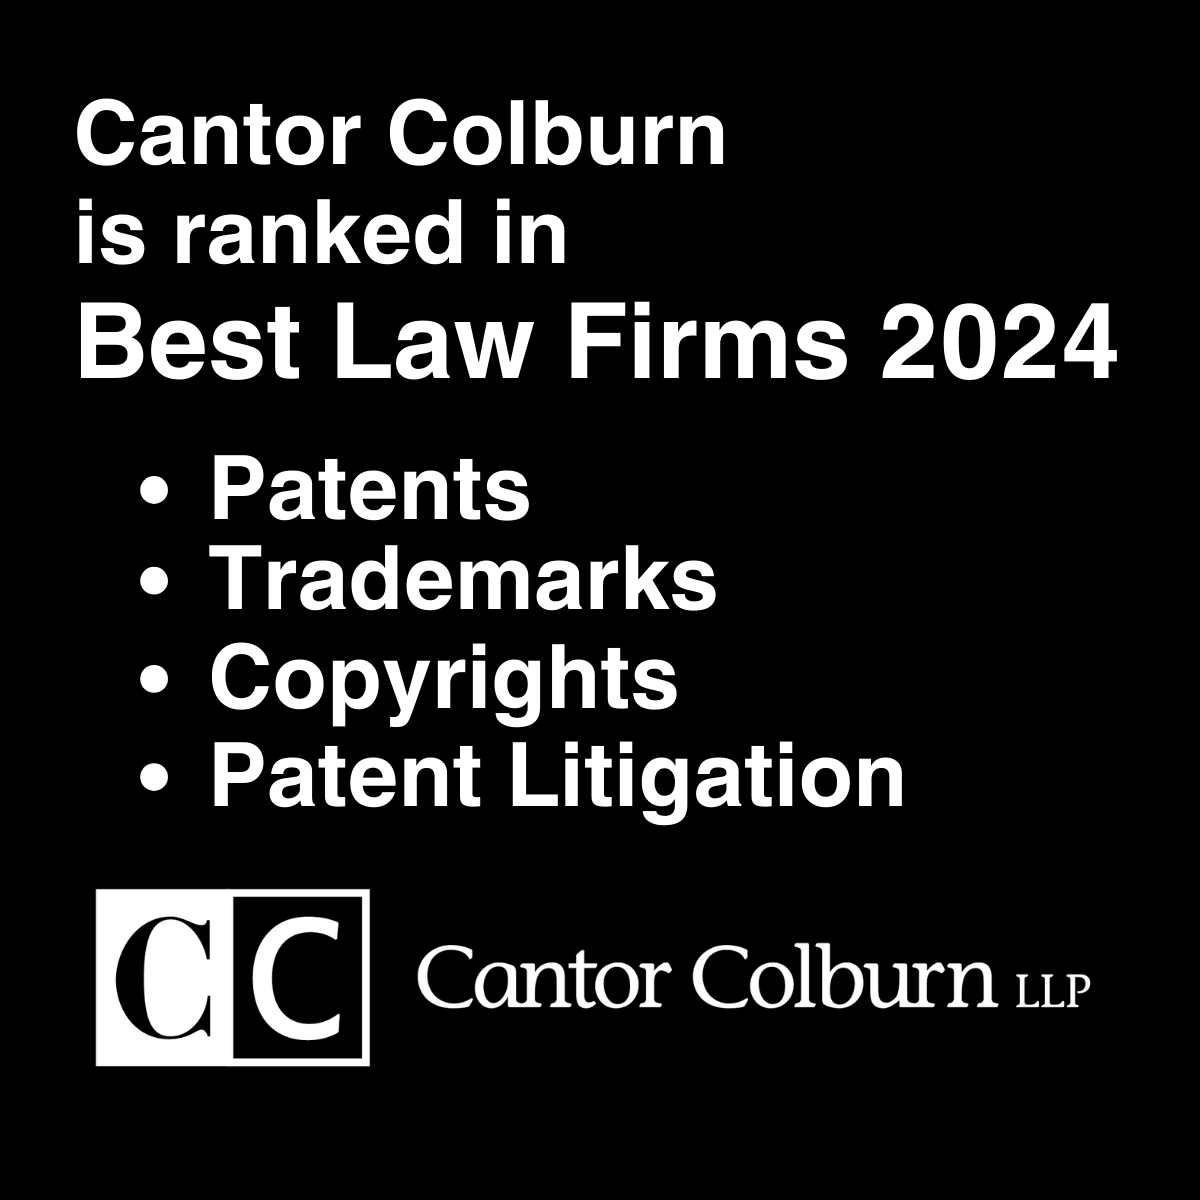 Cantor Colburn is Best Law Firm 2024